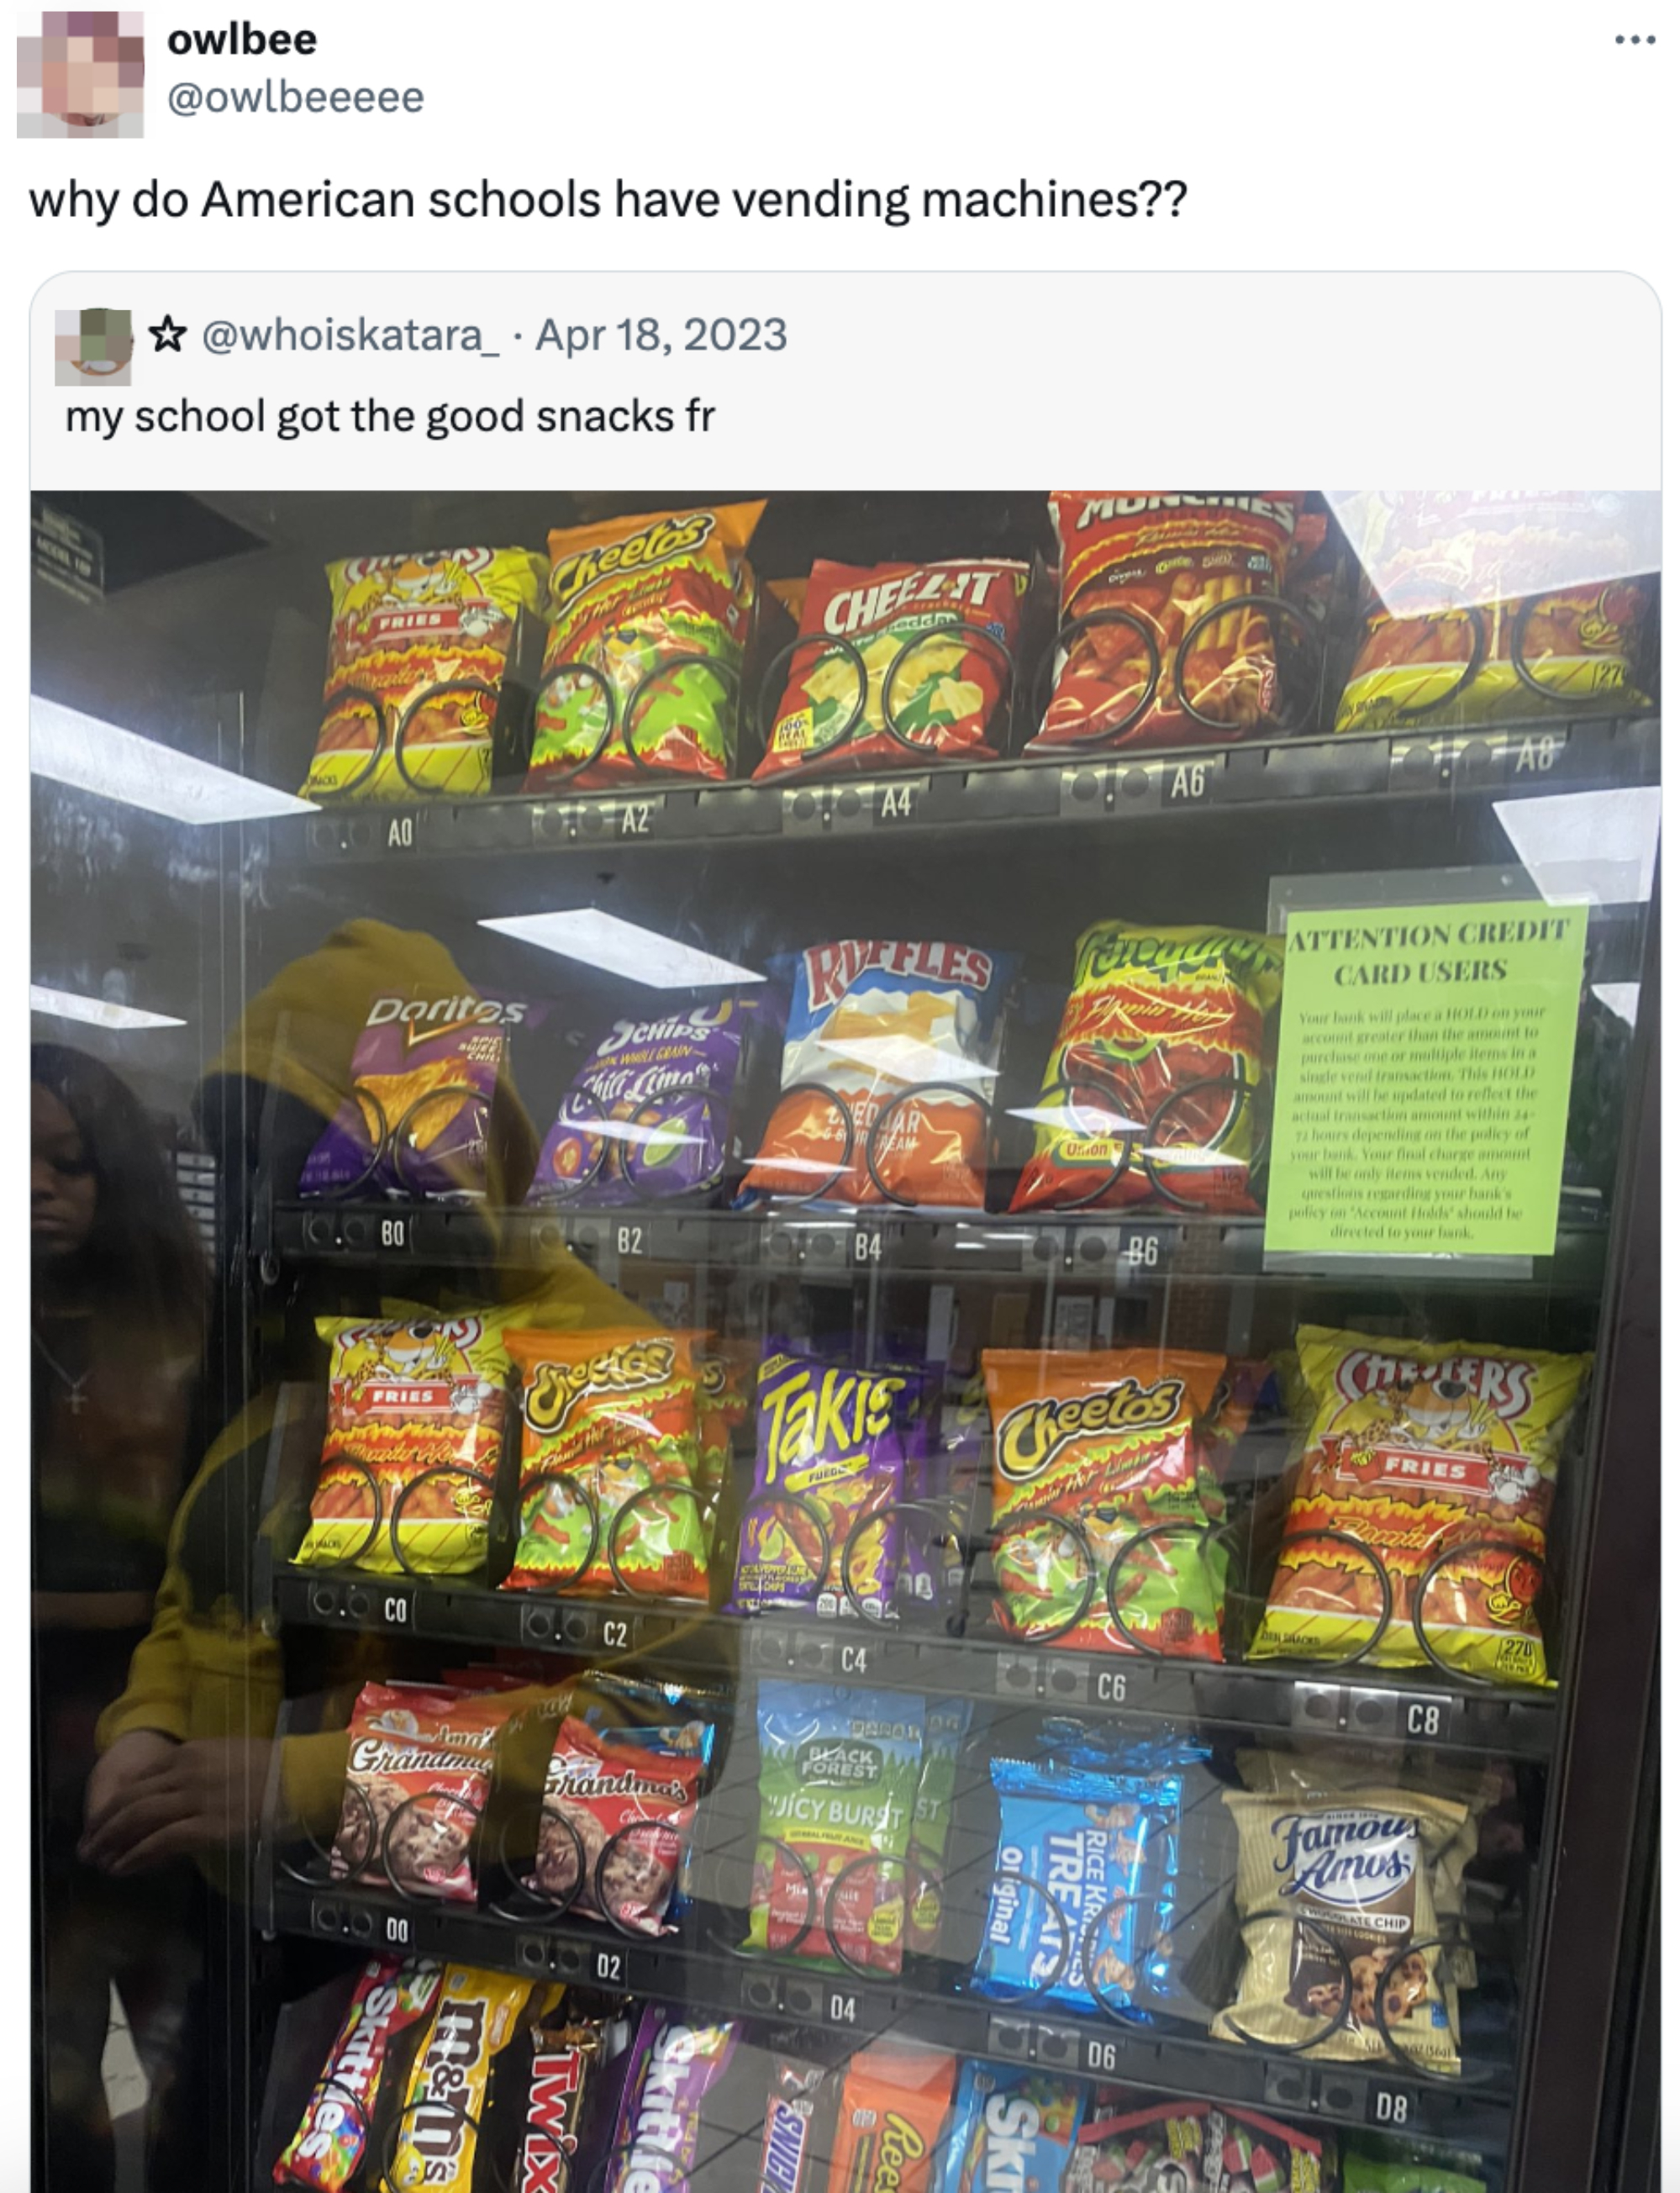 Vending machine filled with various snacks like chips and candies, with a reflection of a person on the glass